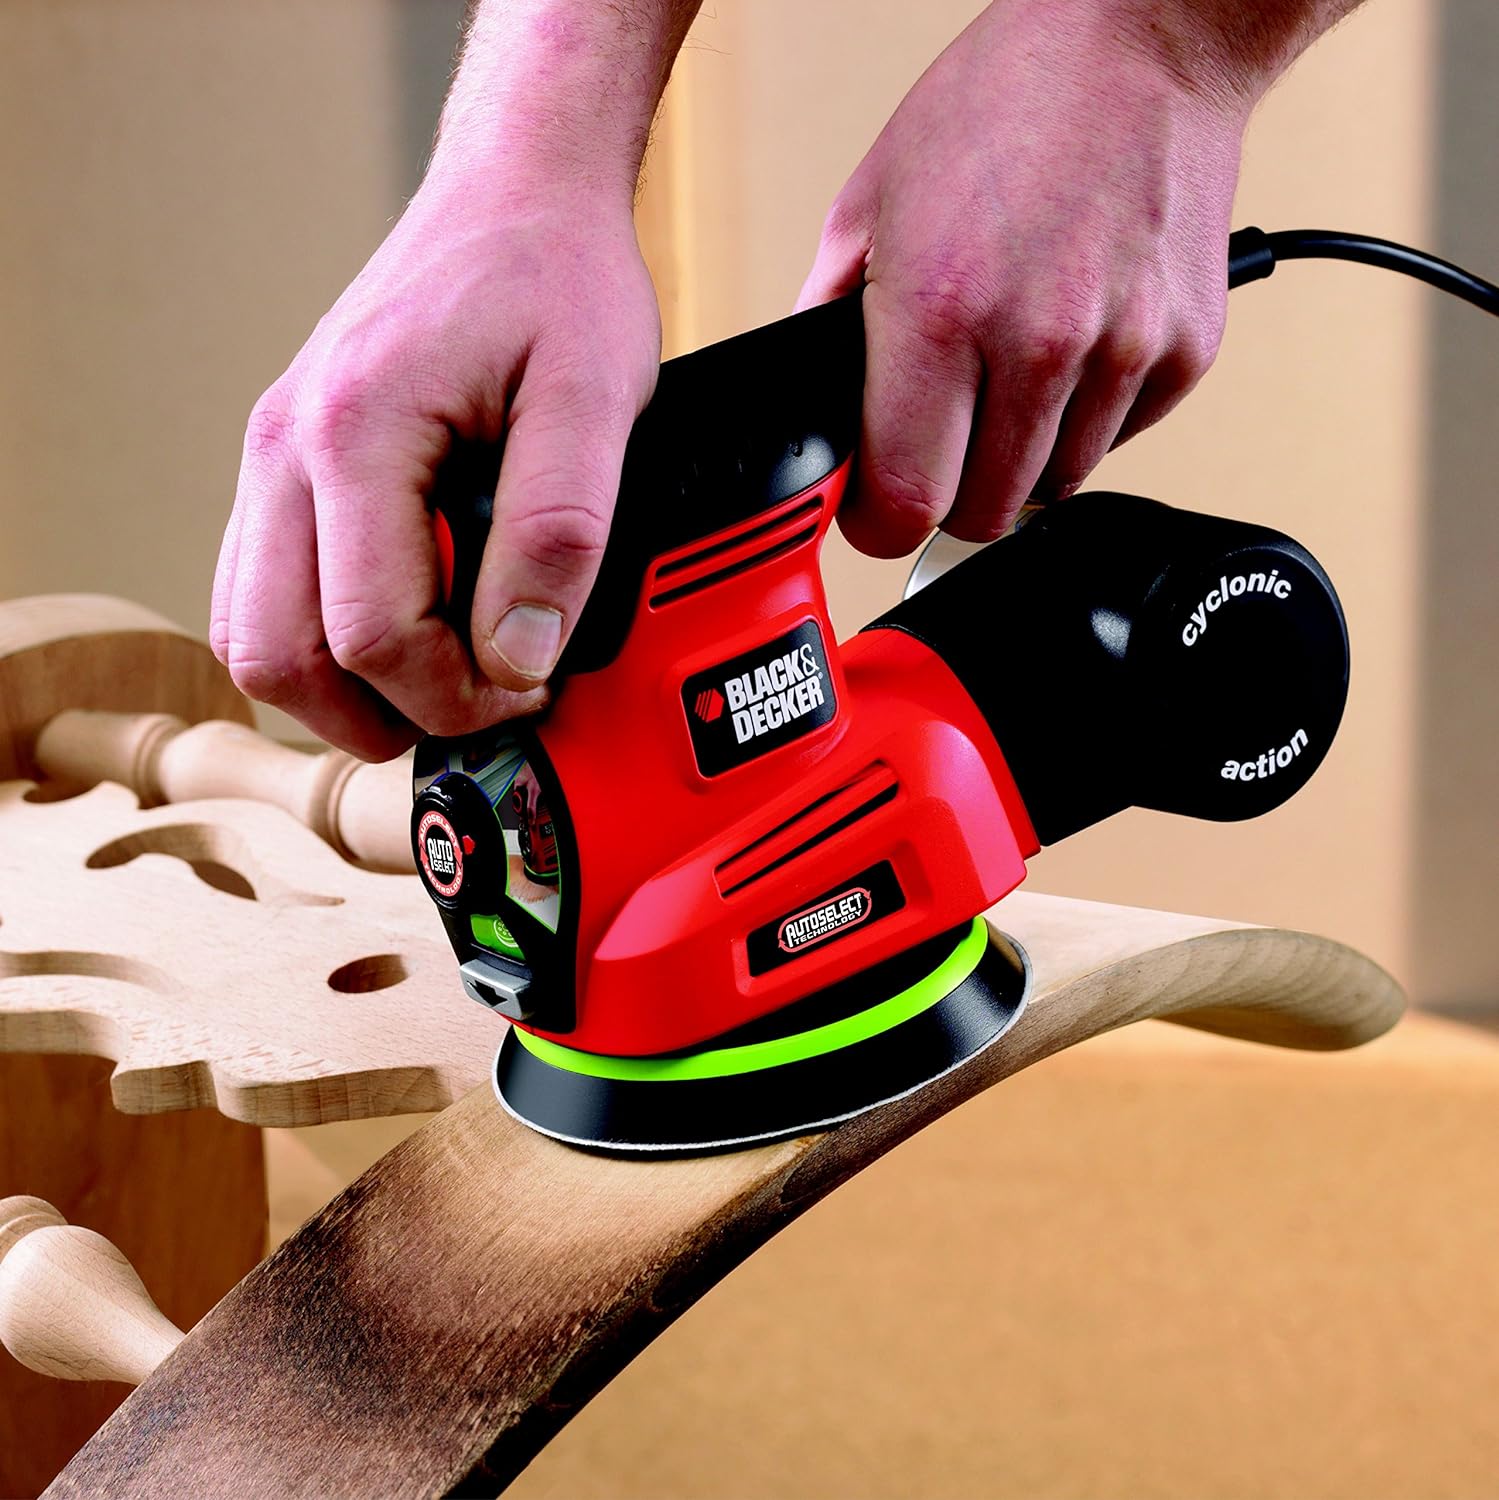 BLACK+DECKER KA280LSA-QS Multi Sander 4 In 1, With Plate For Shutters, With Accessories In Tool Bag